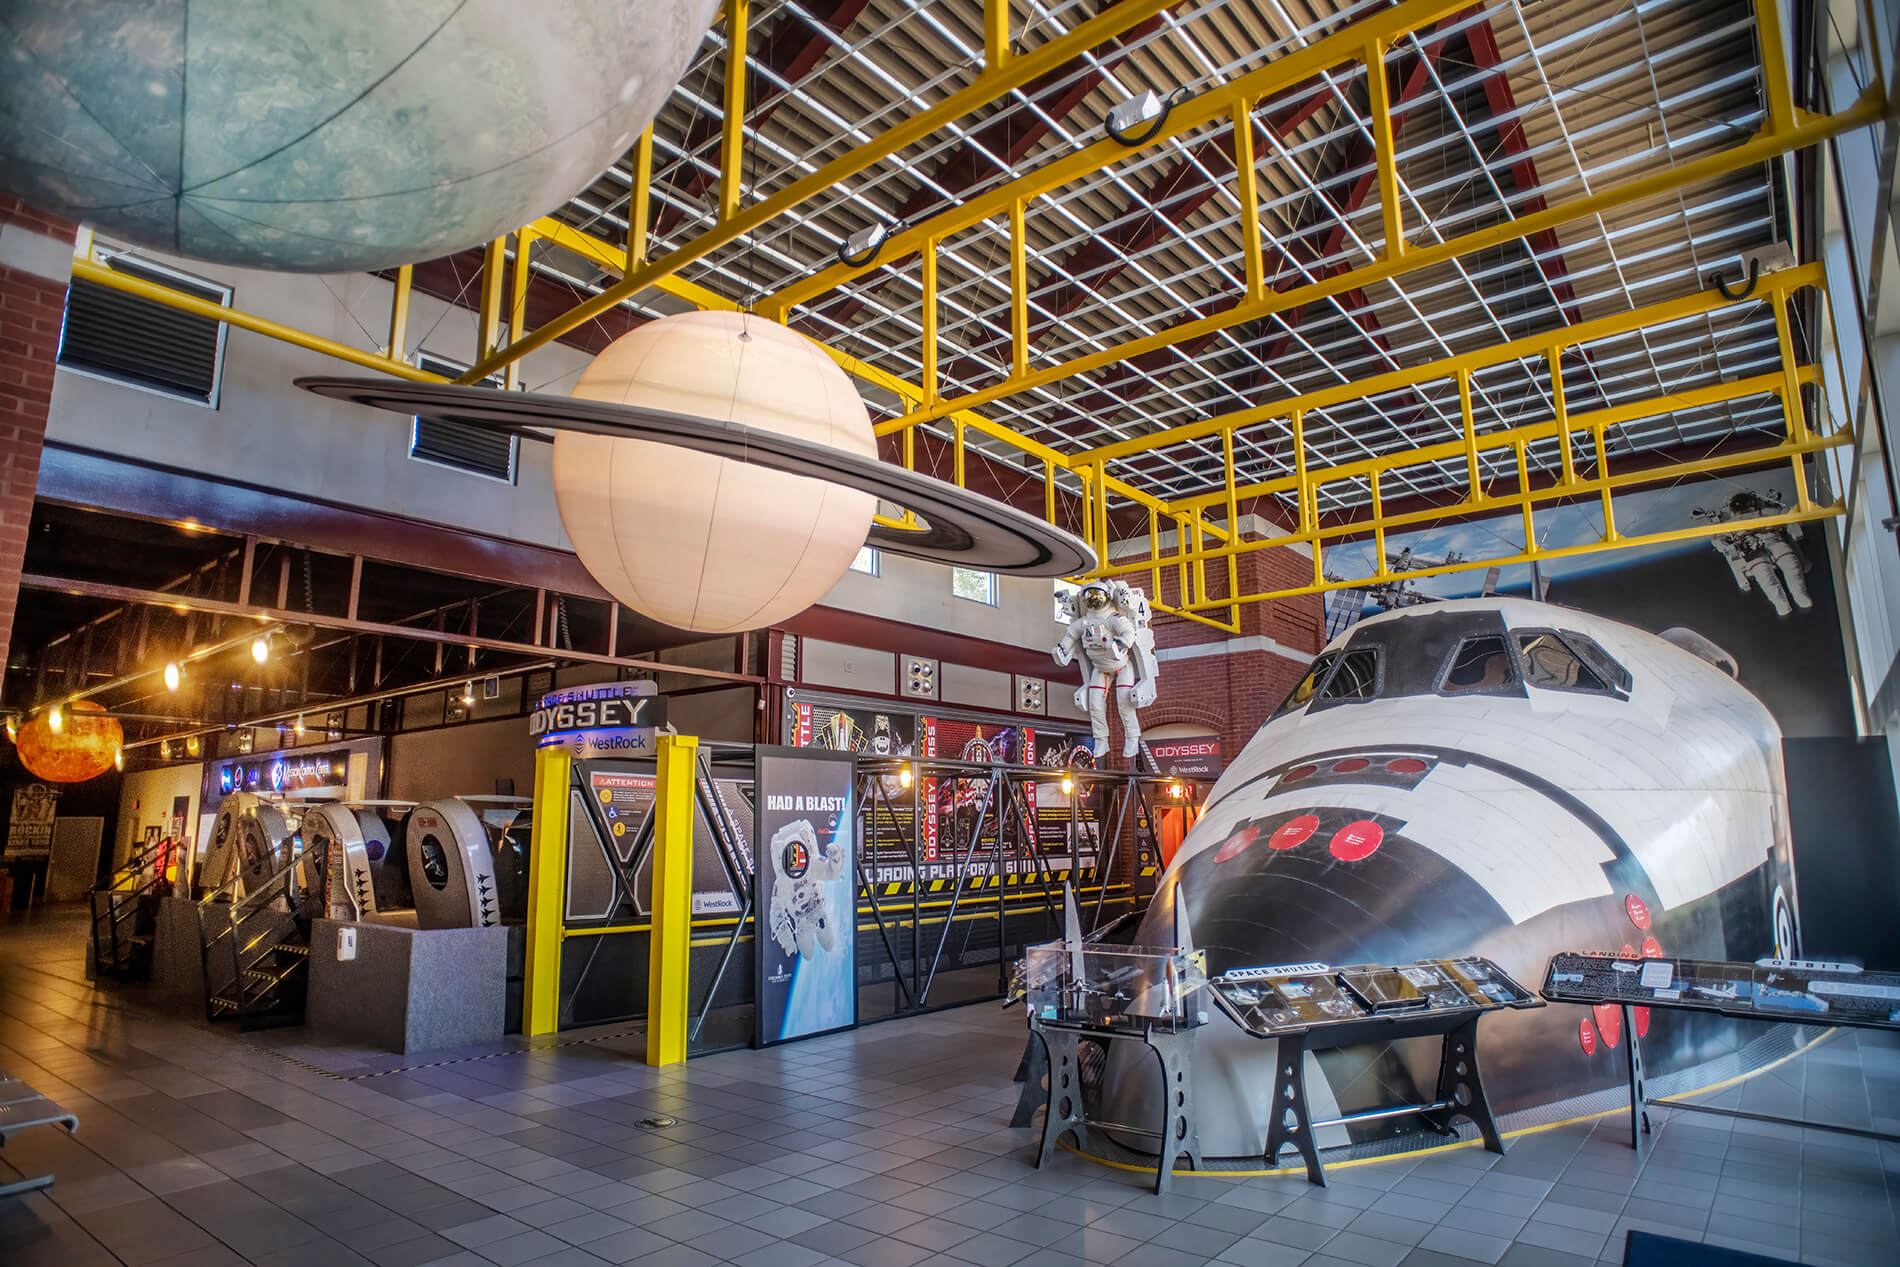 Internal photo of the Coca-Cola Space Science Center's Space Shuttle exhibit and simulators